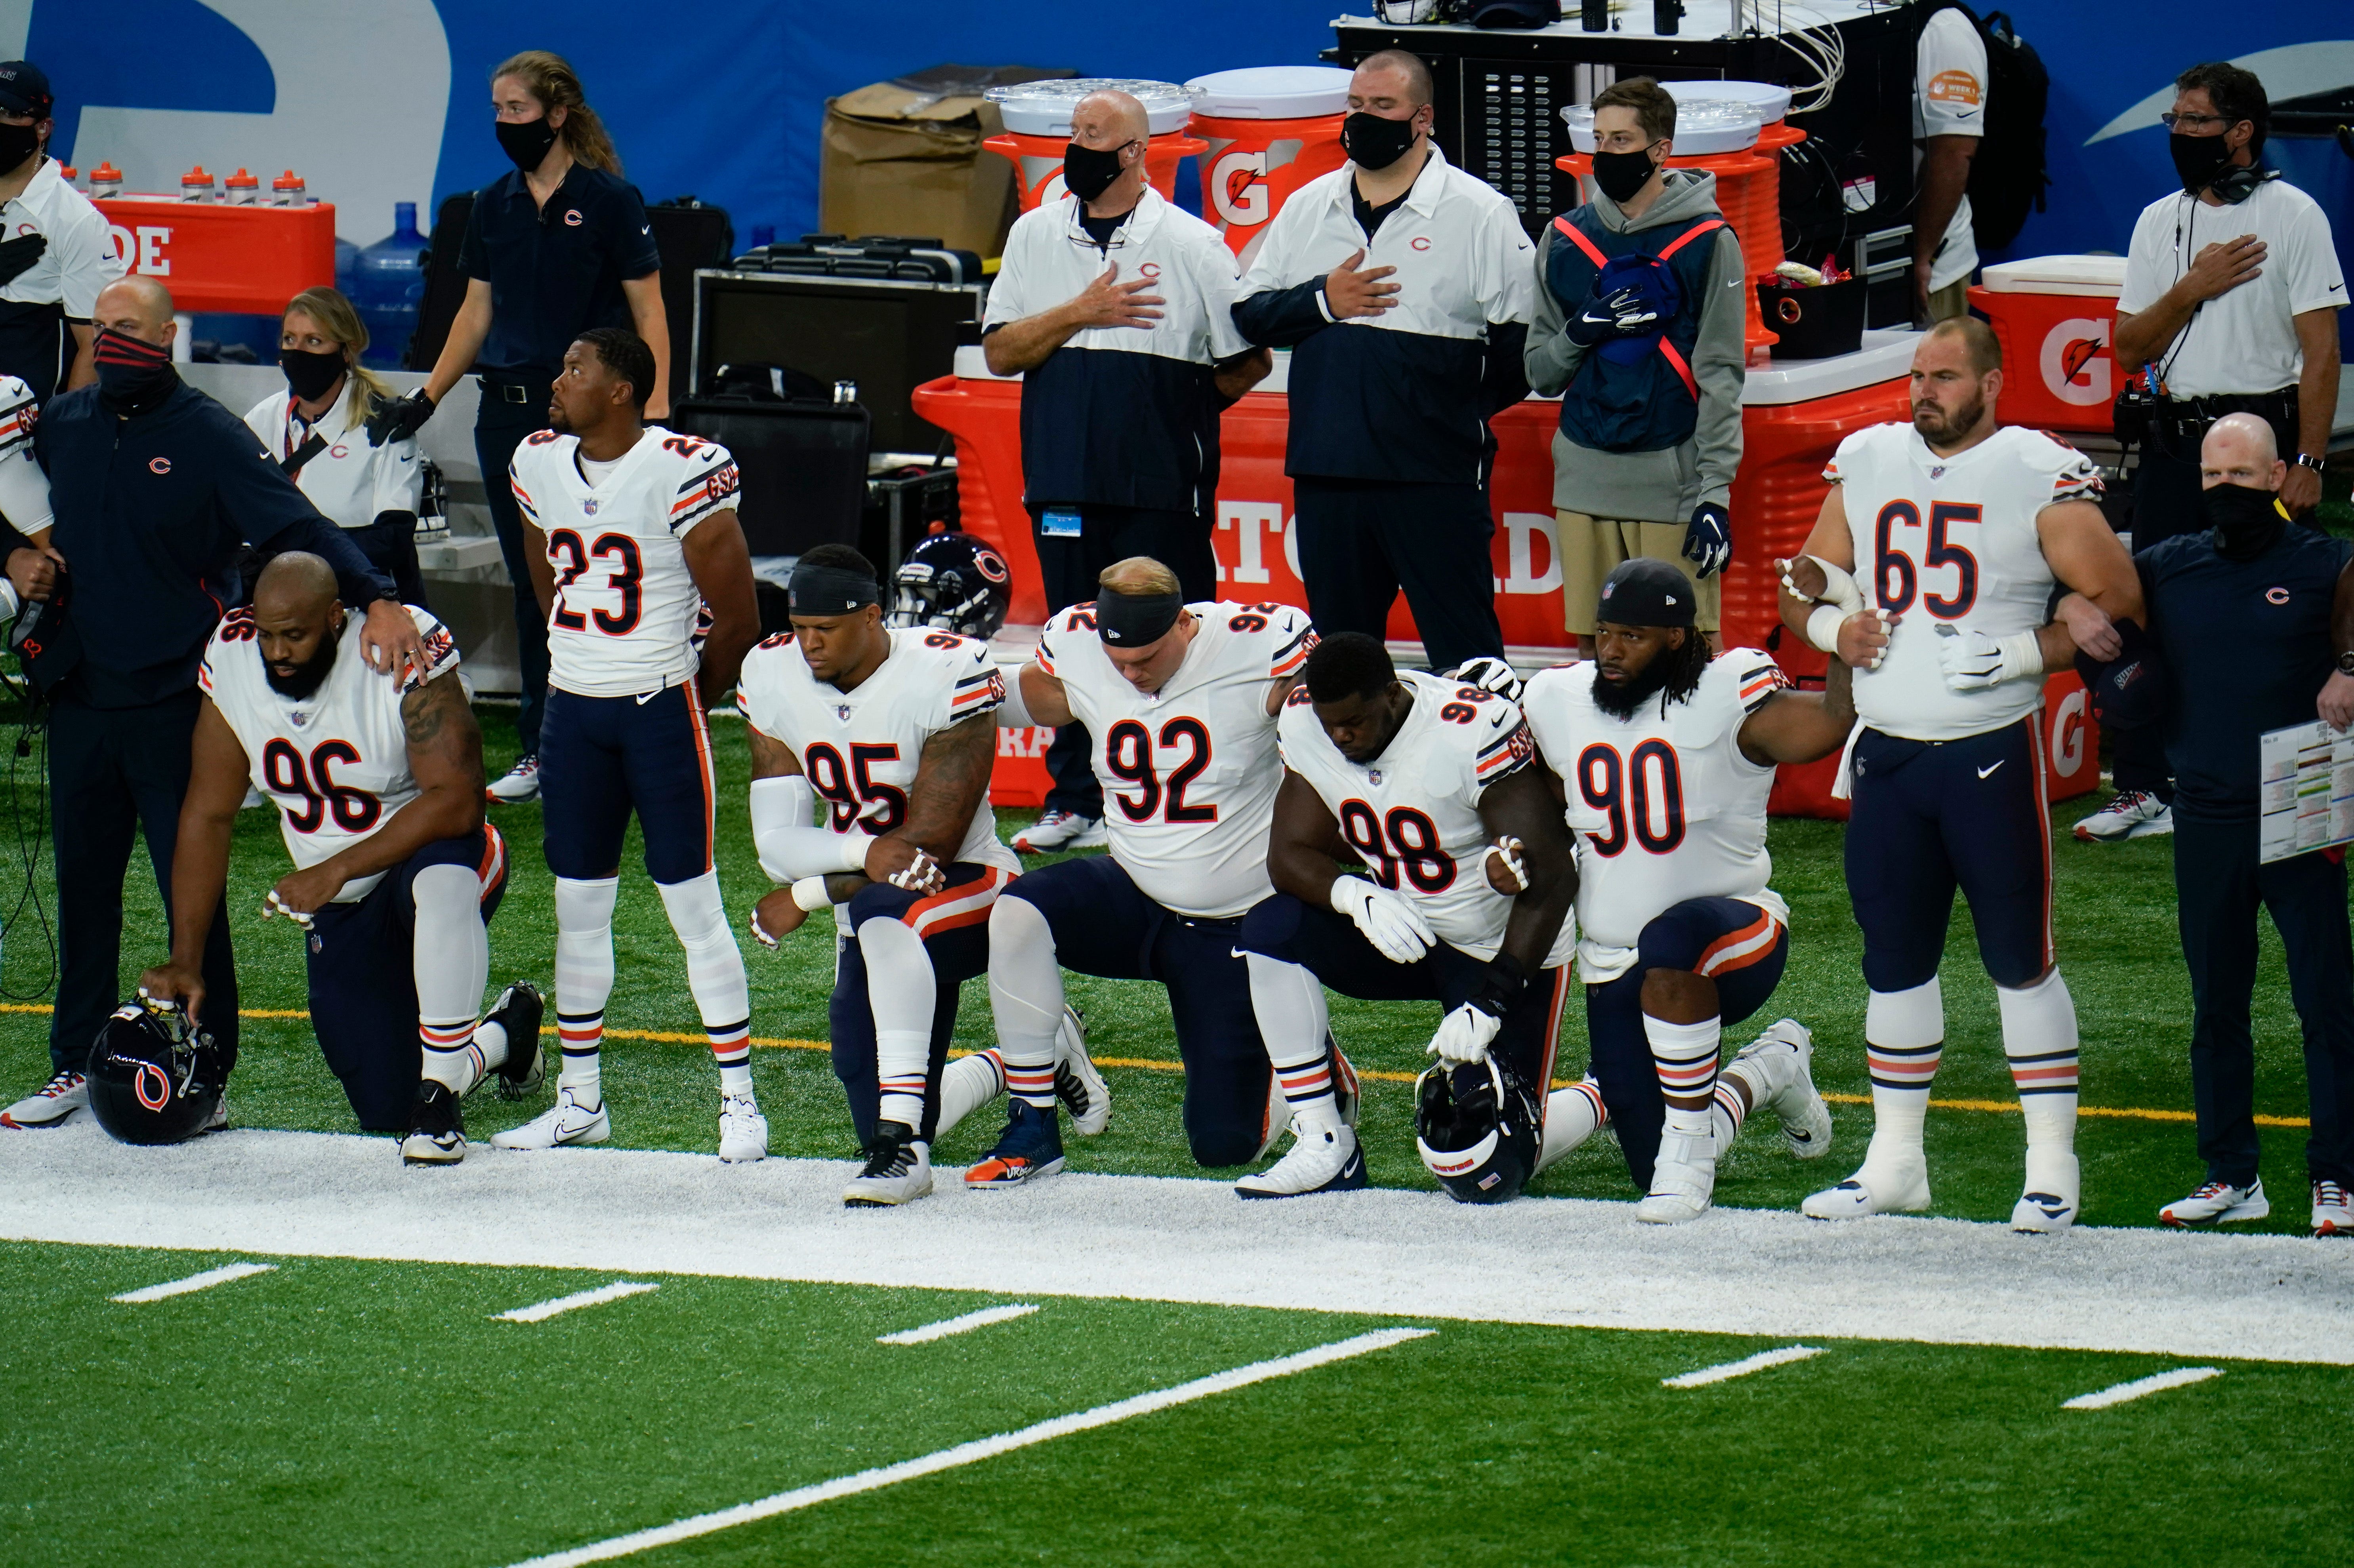 Nfl Several Players Kneel For Anthem Some Teams Stay In Locker Room